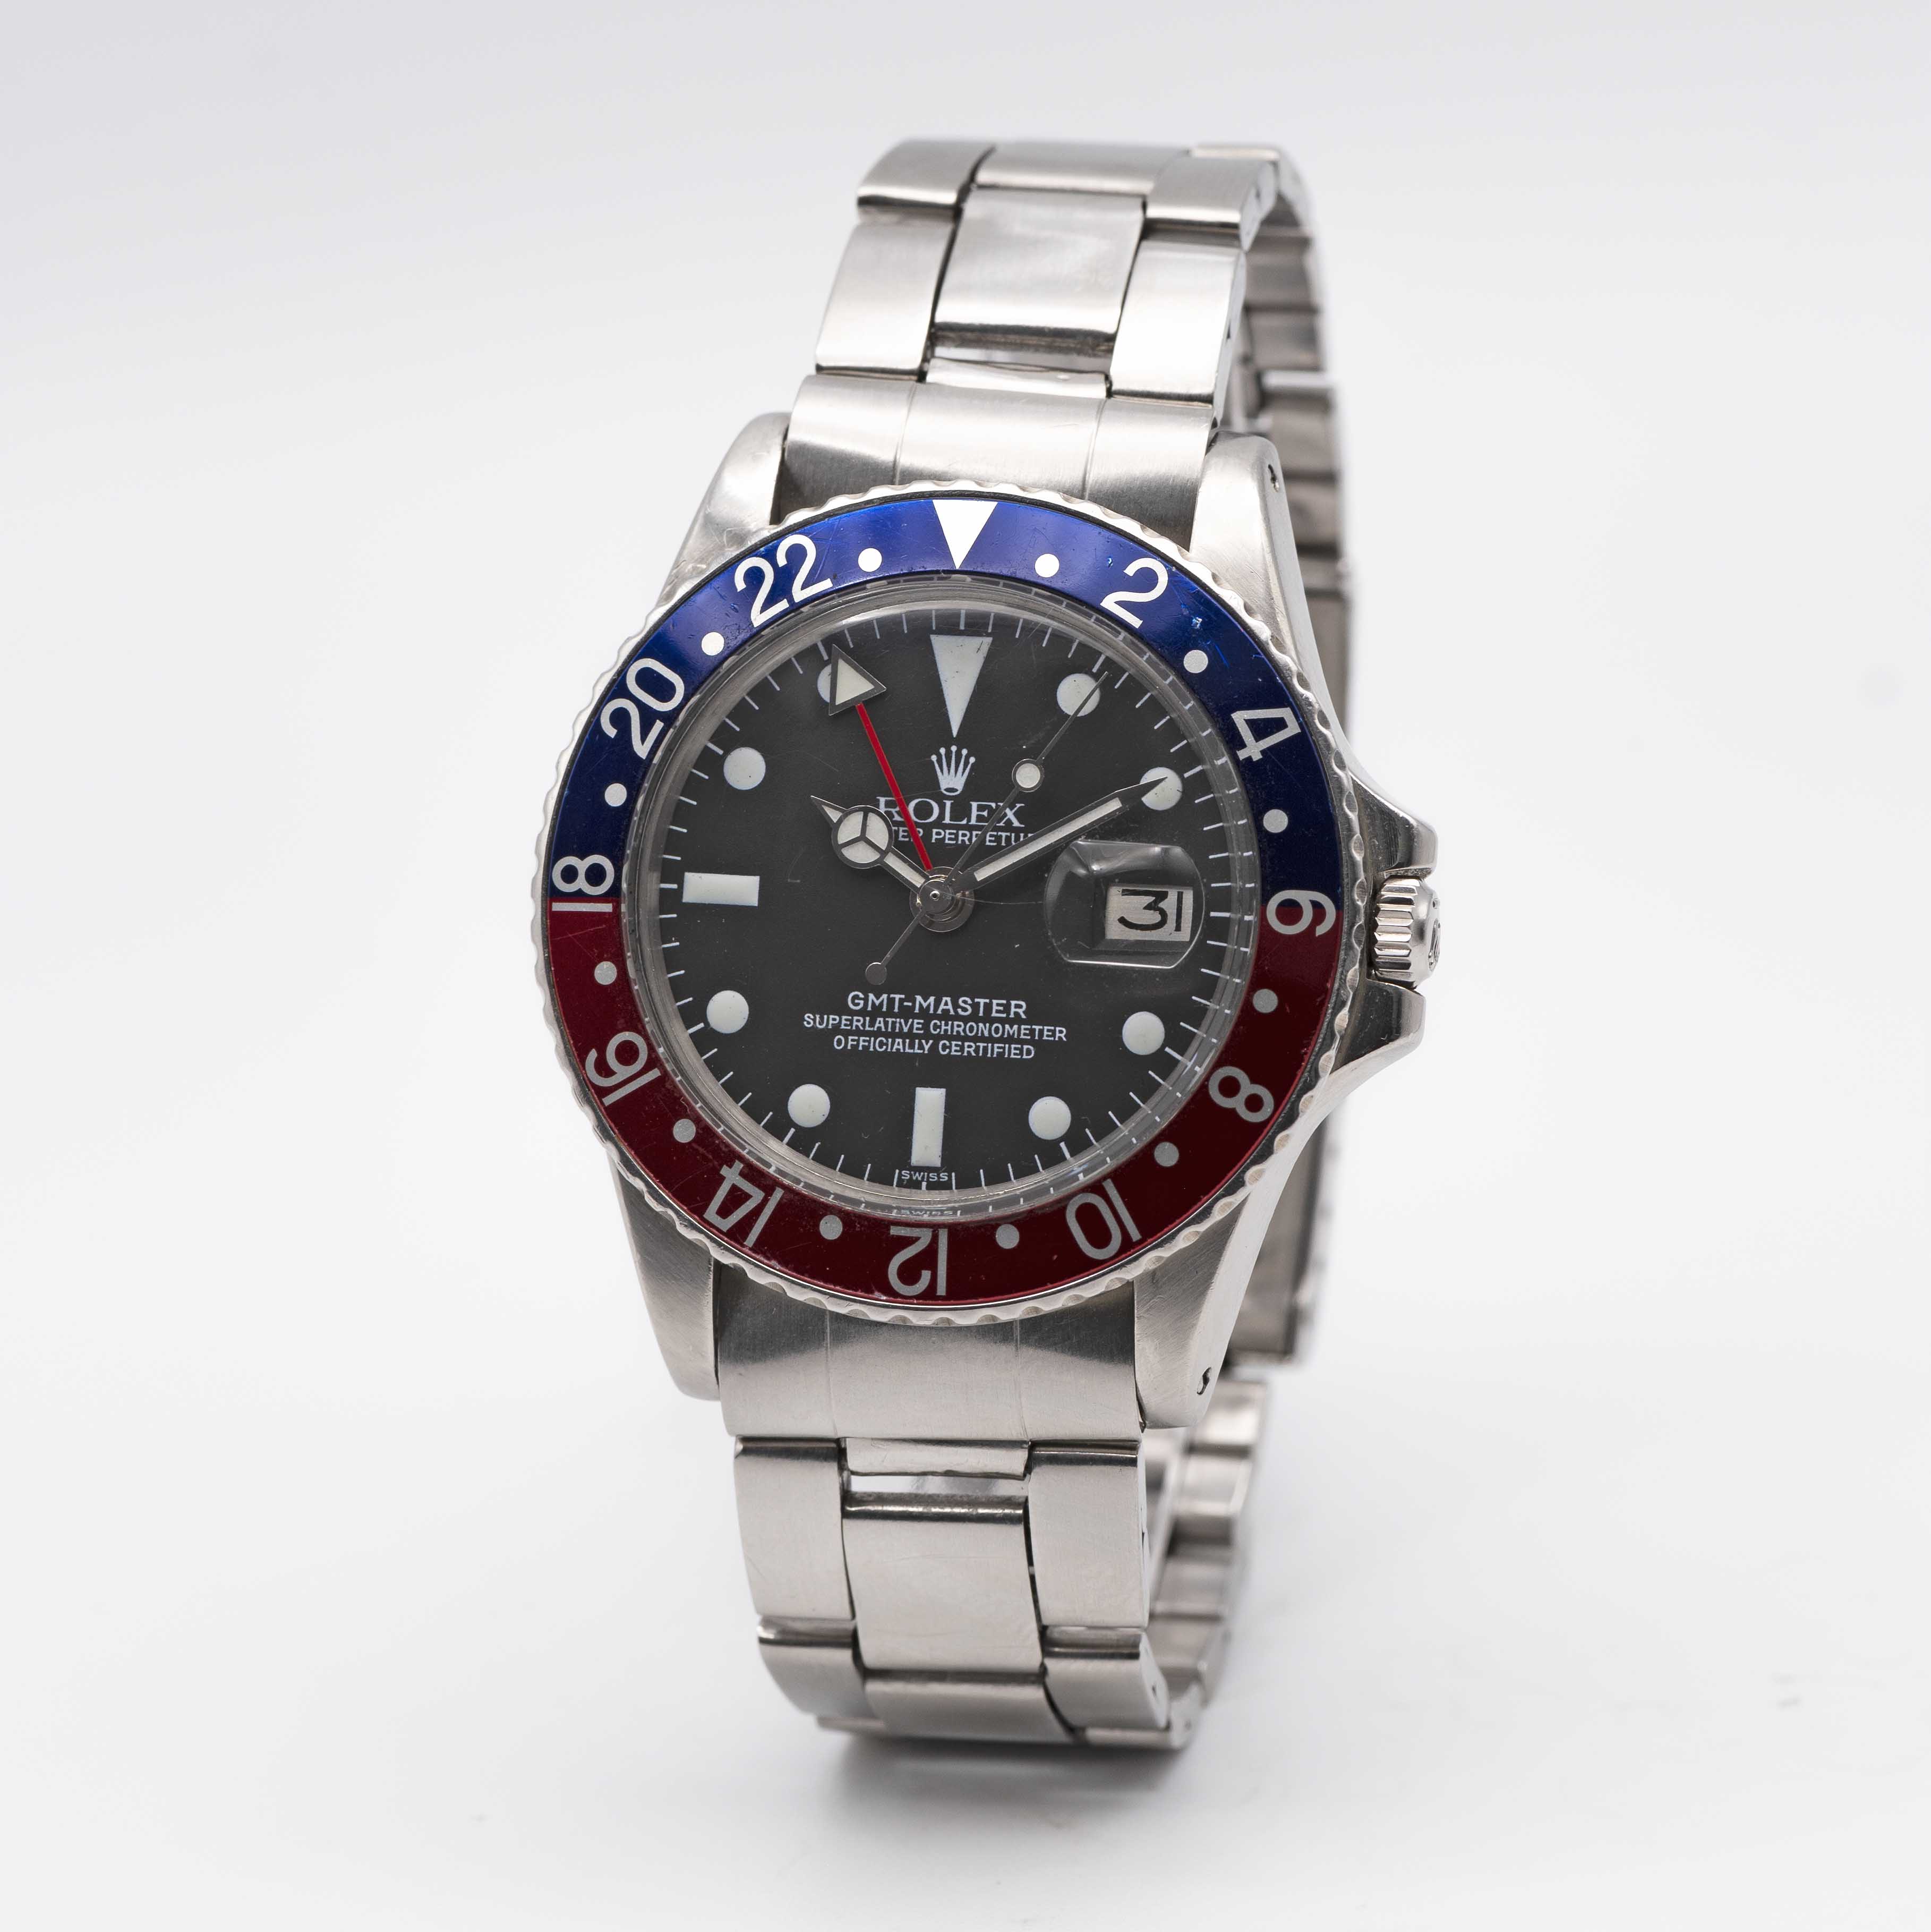 A GENTLEMAN'S STAINLESS STEEL ROLEX OYSTER PERPETUAL DATE GMT MASTER "PEPSI" BRACELET WATCH CIRCA - Image 3 of 10